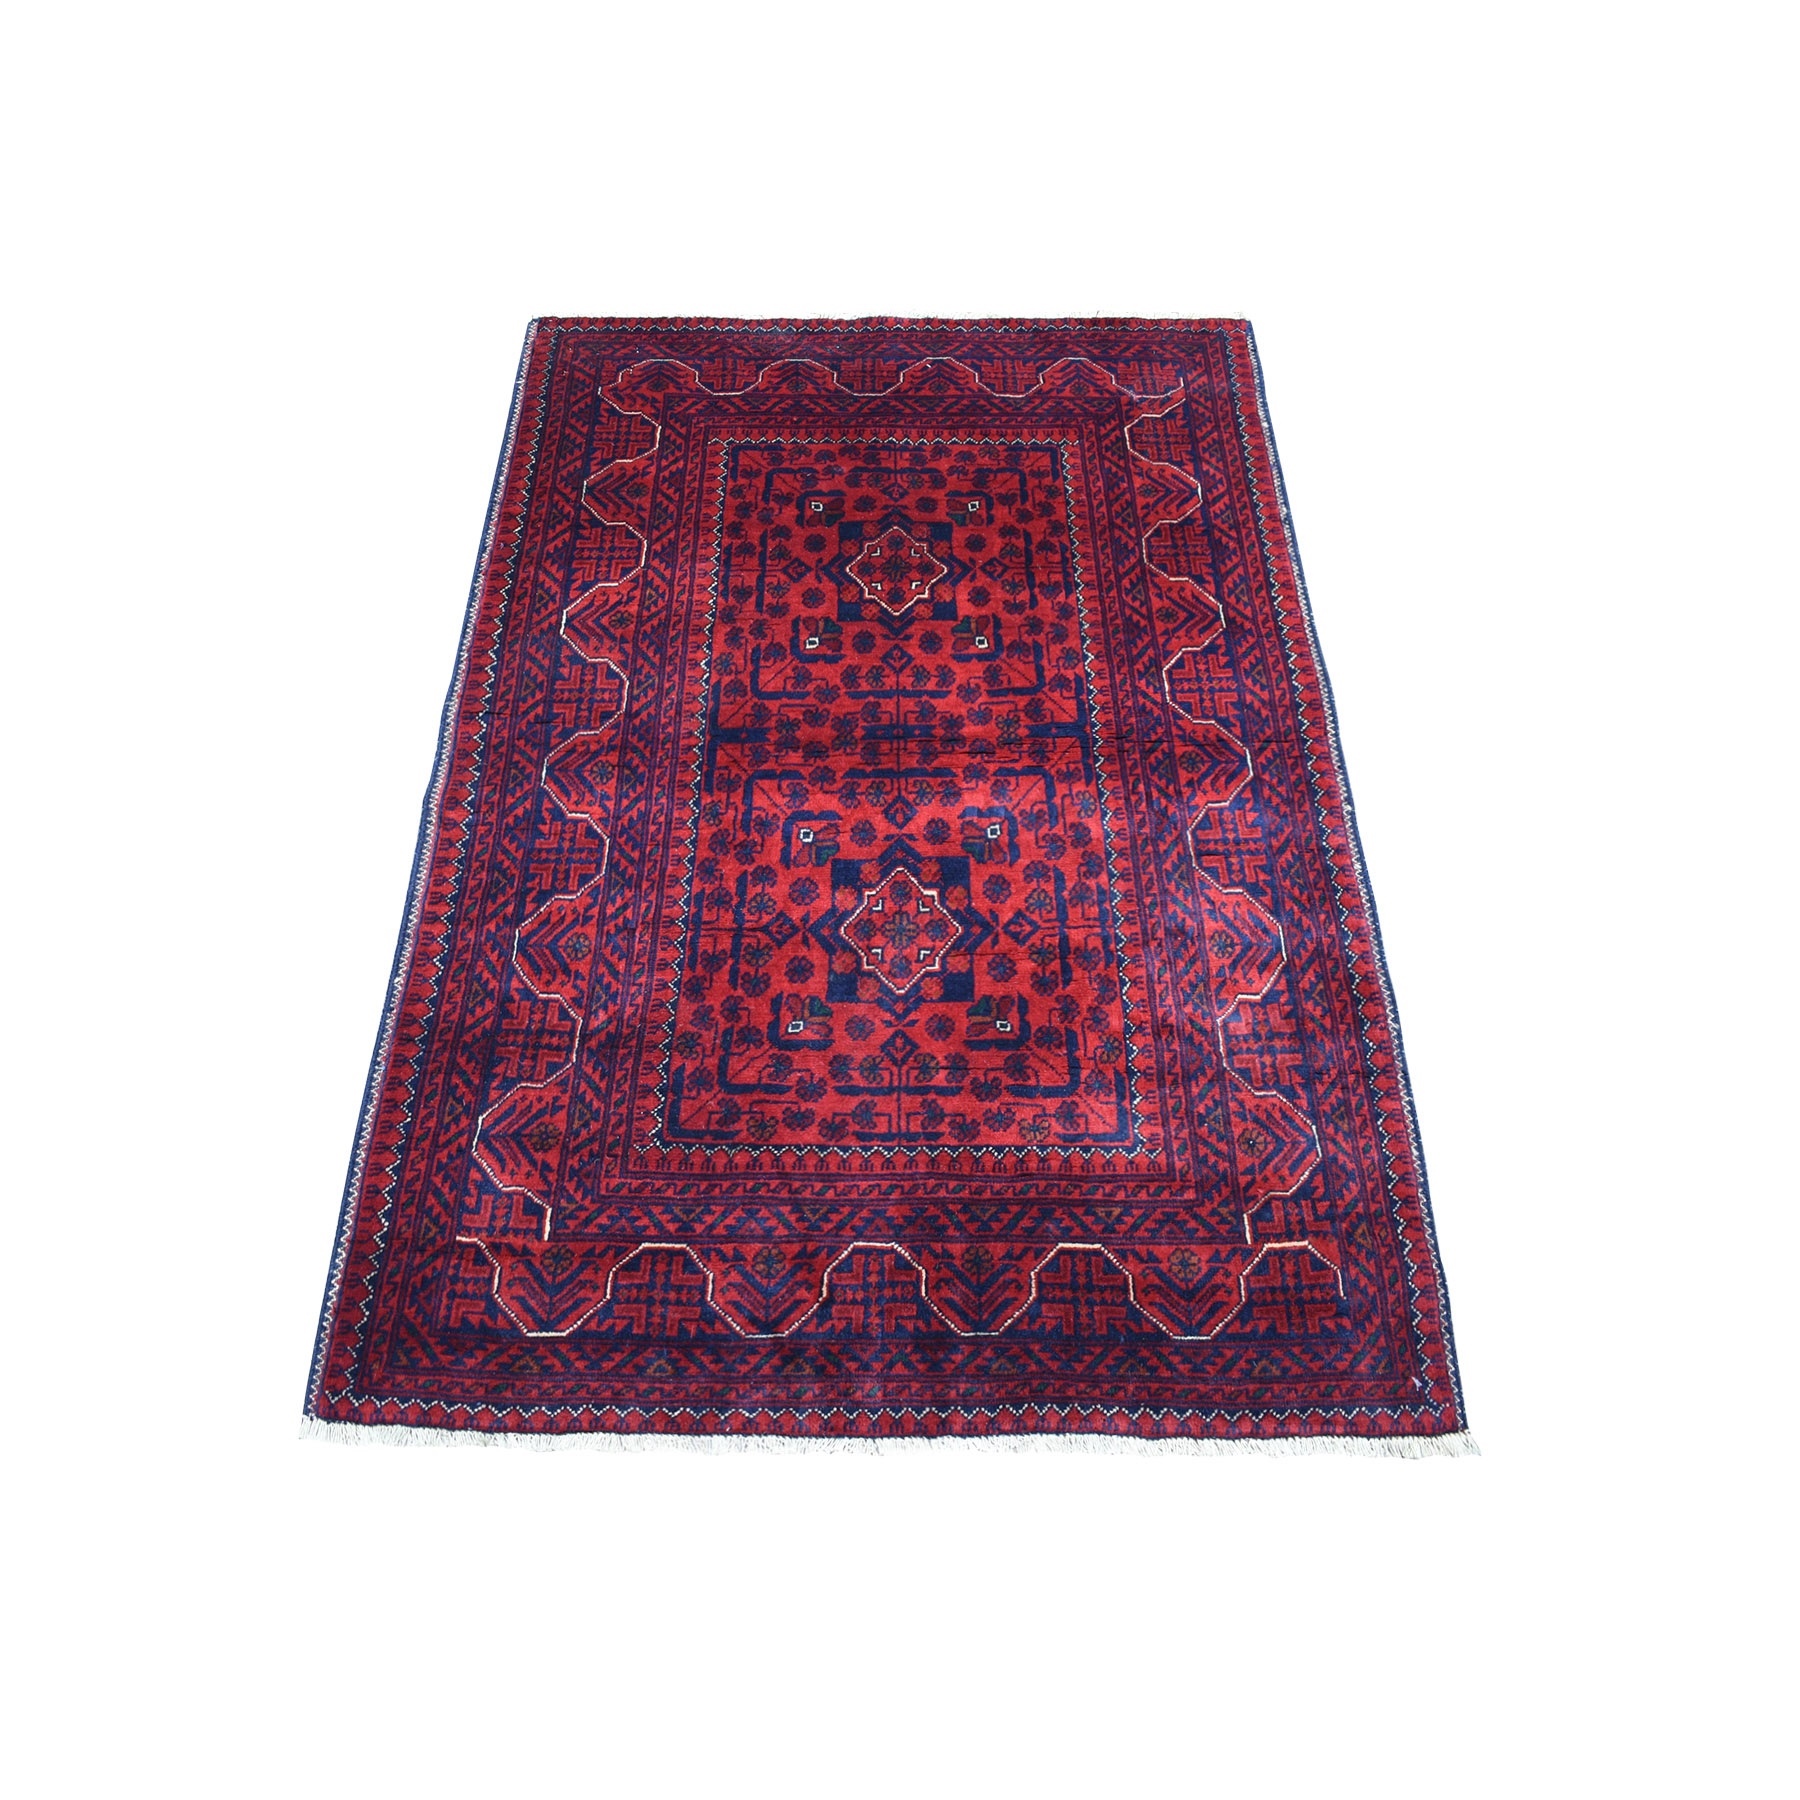 Nomadic And Village Collection Hand Knotted Red Rug No: 1135916